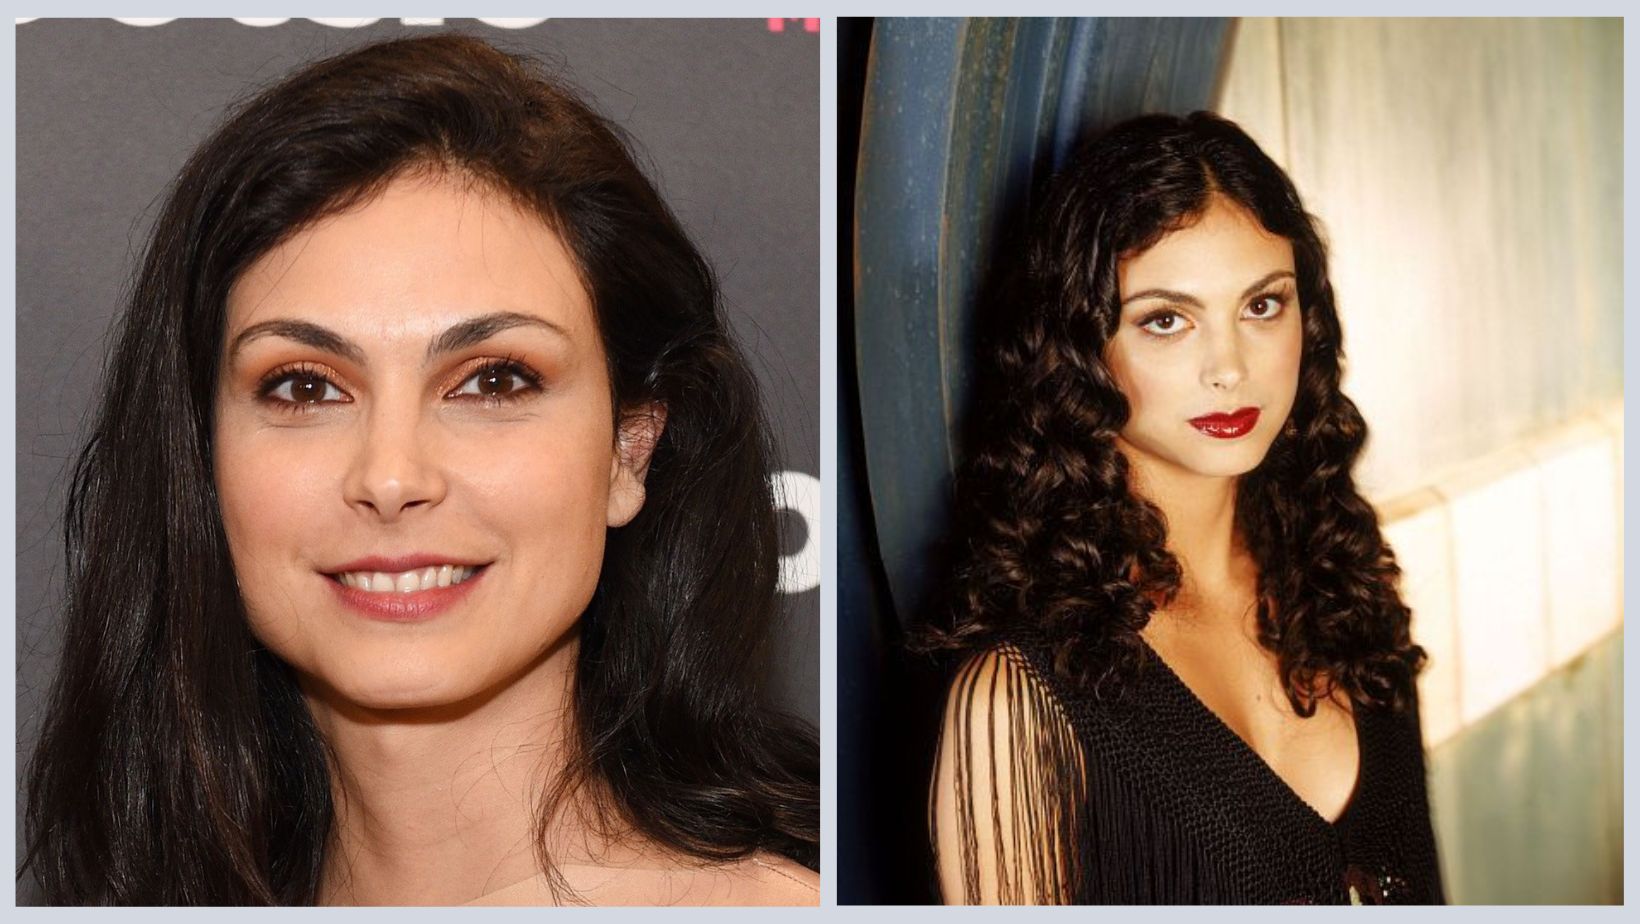 What Is Morena Baccarin Gender?